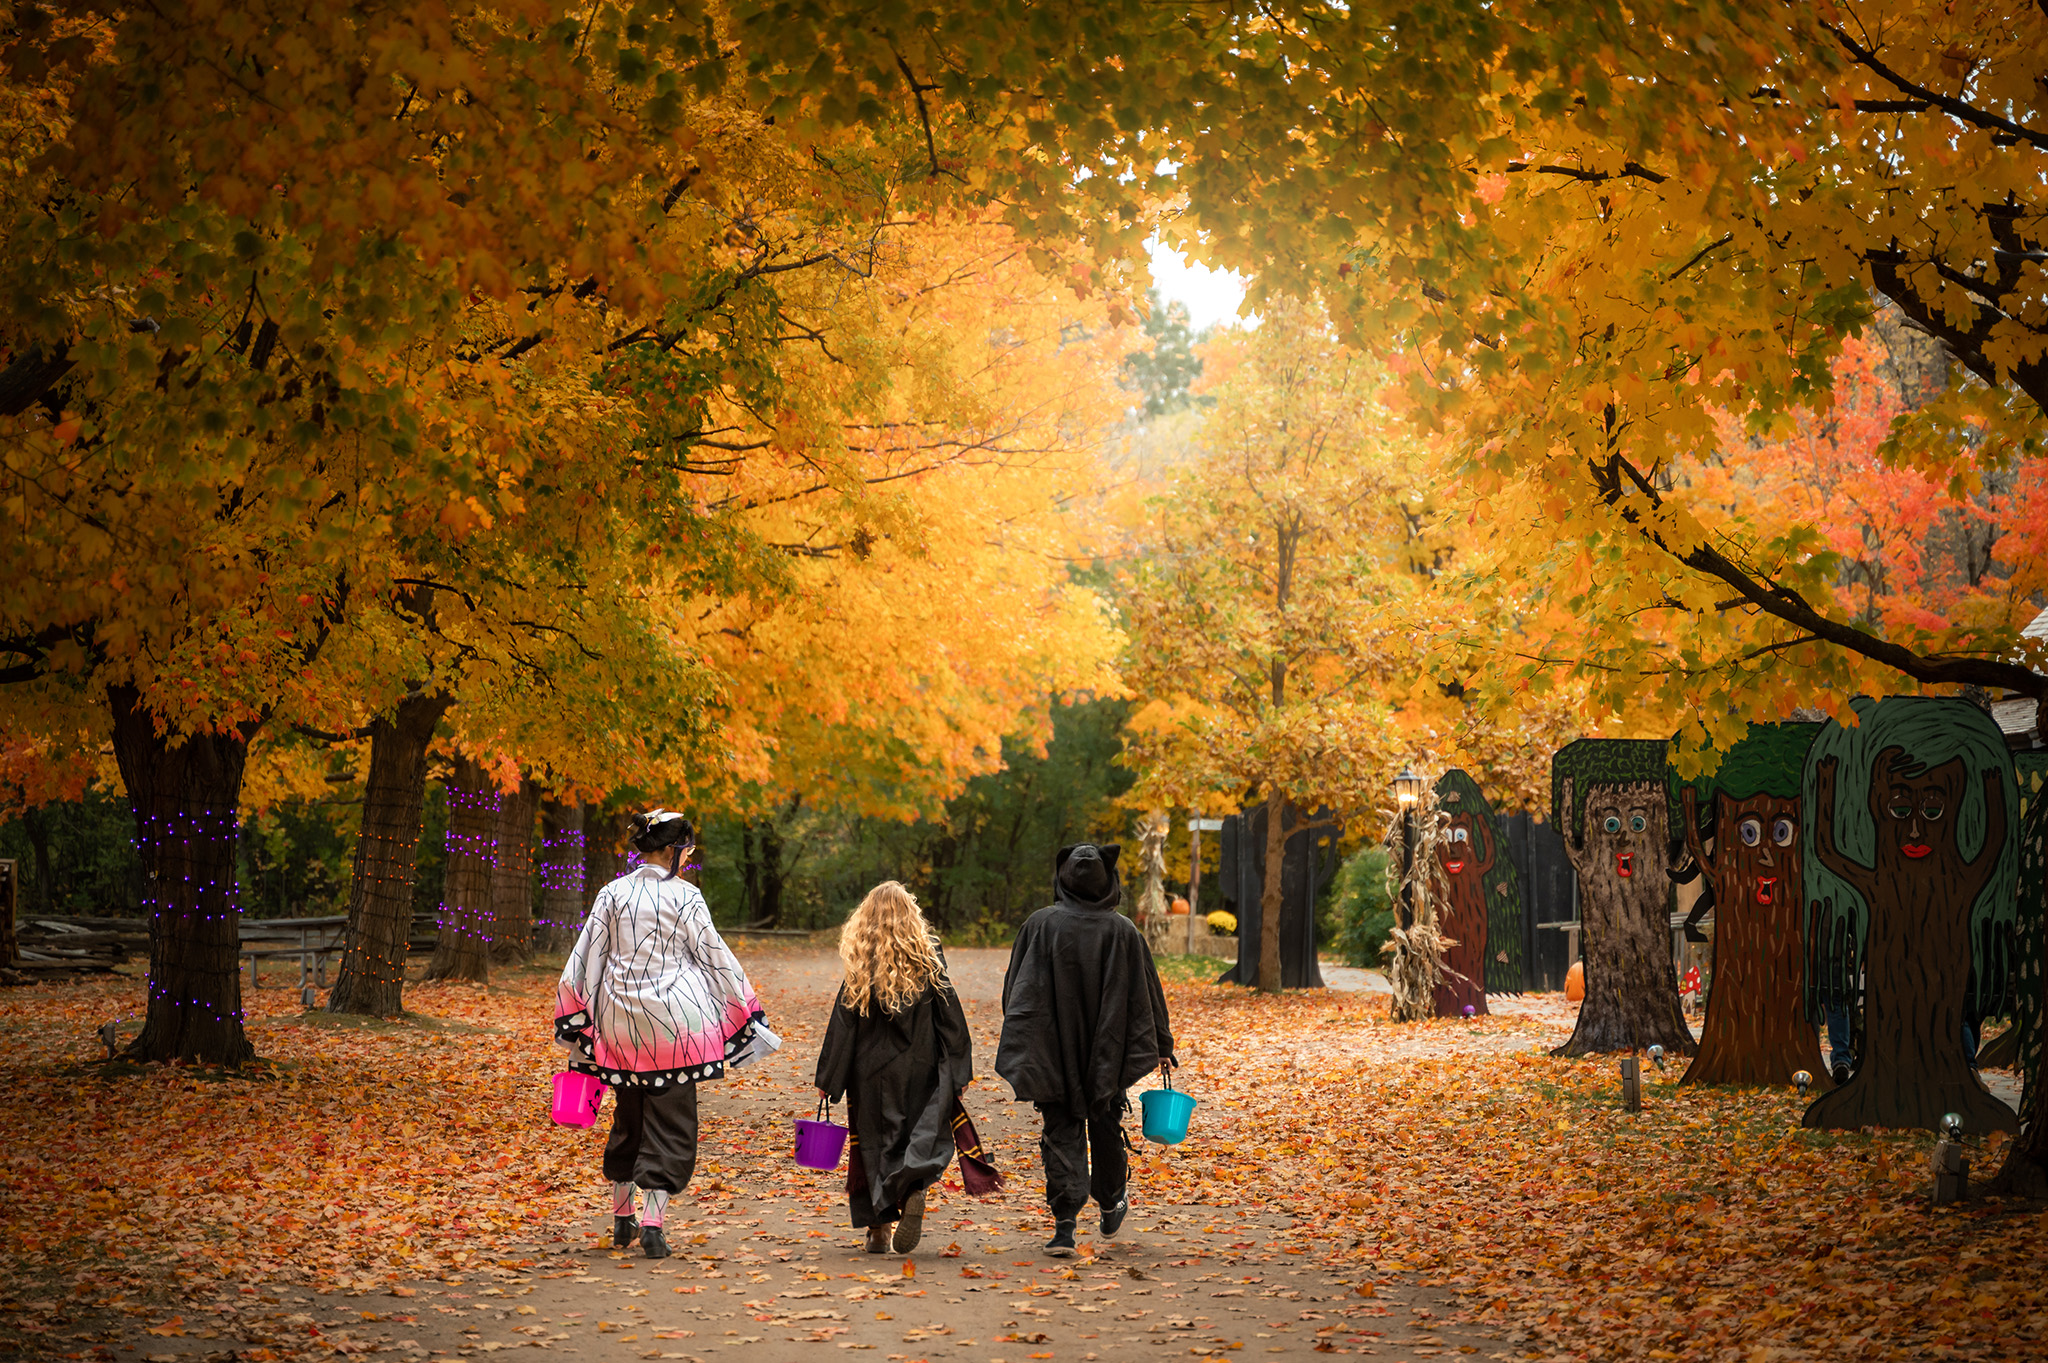 4 Tips for Capturing a Beautiful Autumn - Kids trick or treating